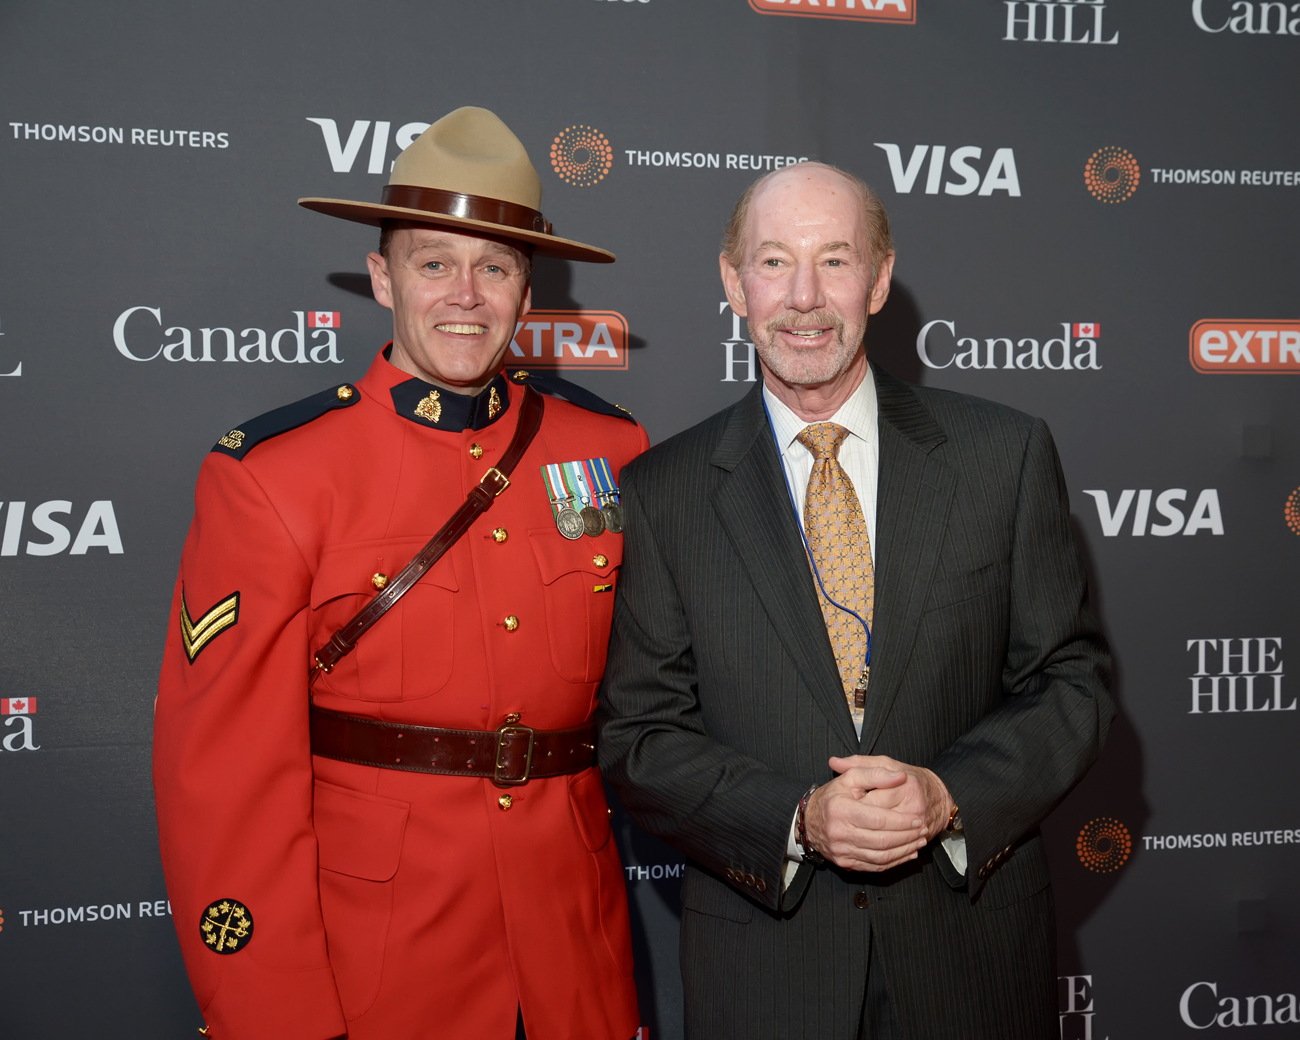 Canadian Mountie John Fitzgerald stands with ESPN Sportscaster Tony Kornheiser at The Hill/Extra/Embassy of Canada WHCD pre-party in Washington D.C. on Friday April 29. (Shannon Finney Photography)